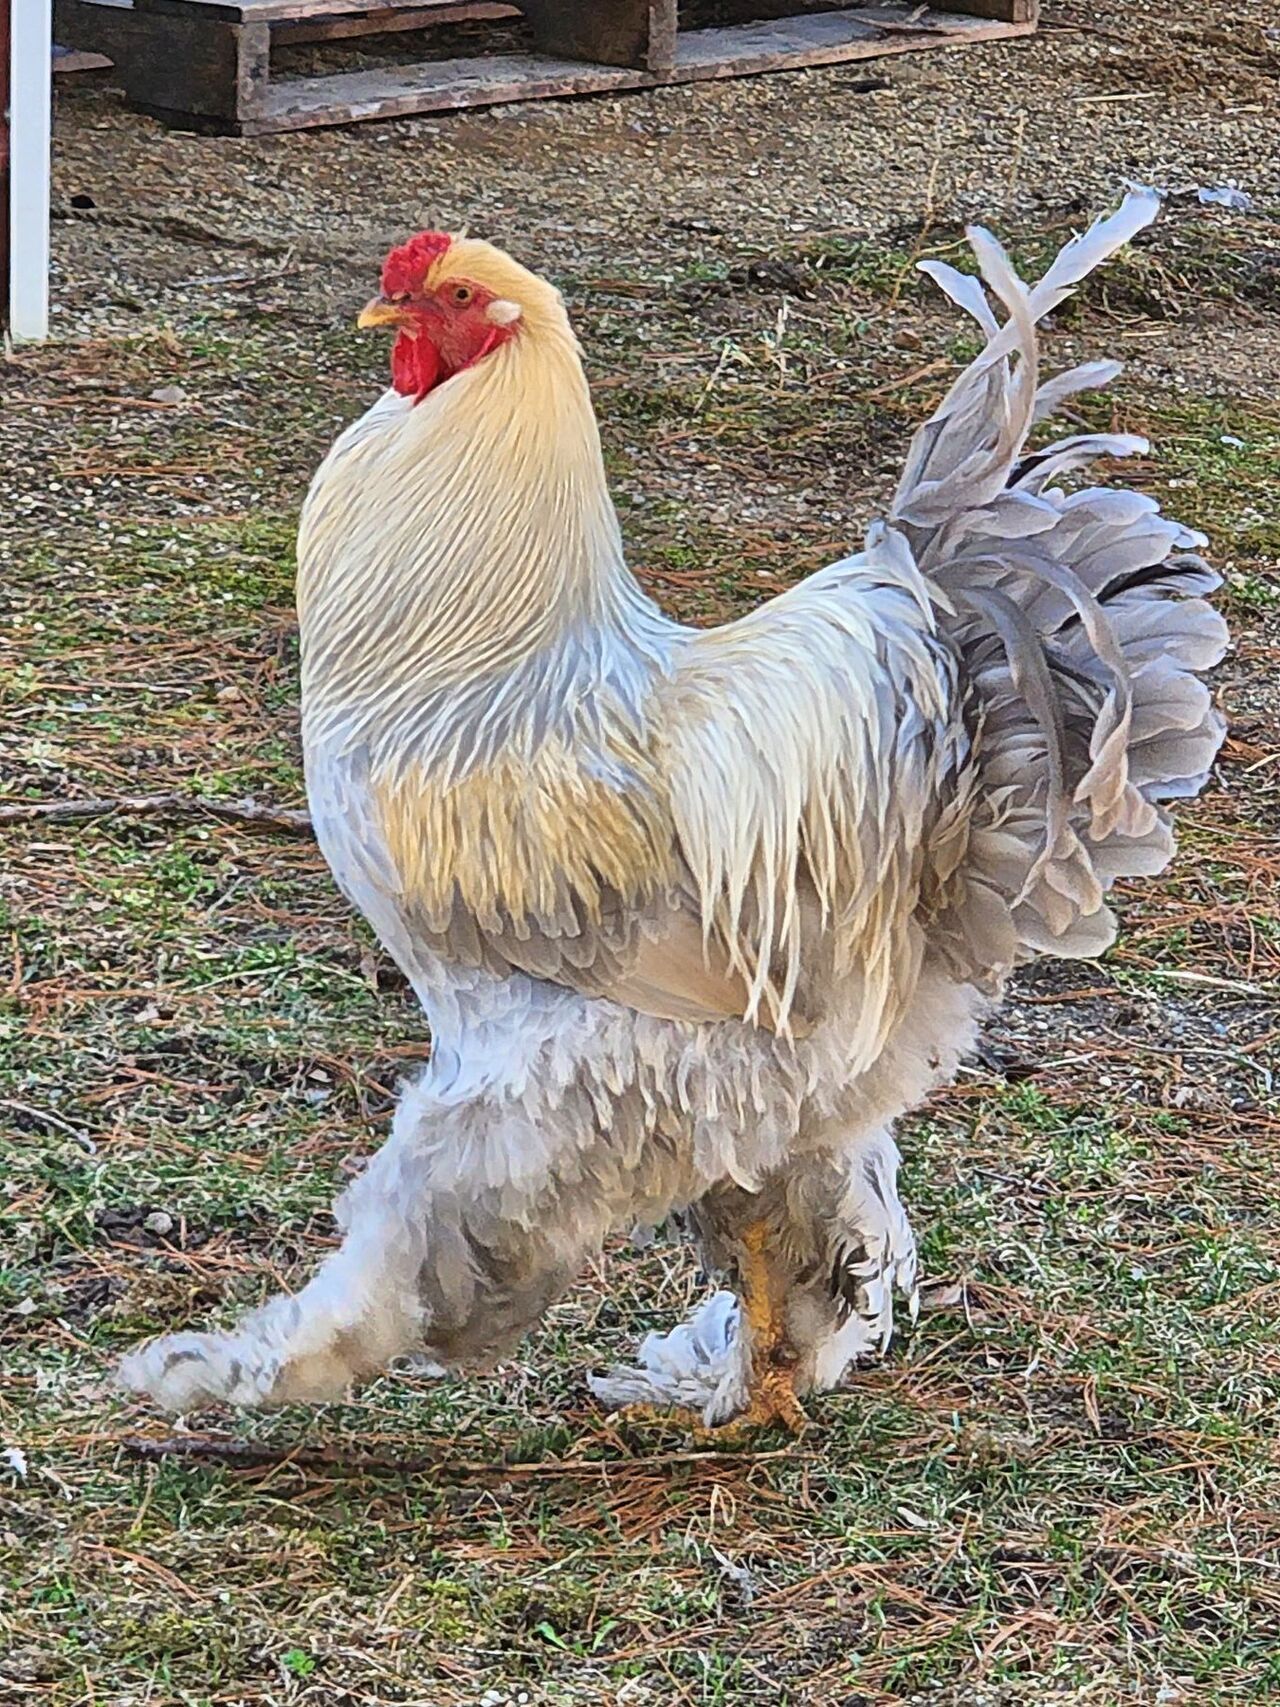 Isabel brahma x light or buff brahma  BackYard Chickens - Learn How to  Raise Chickens